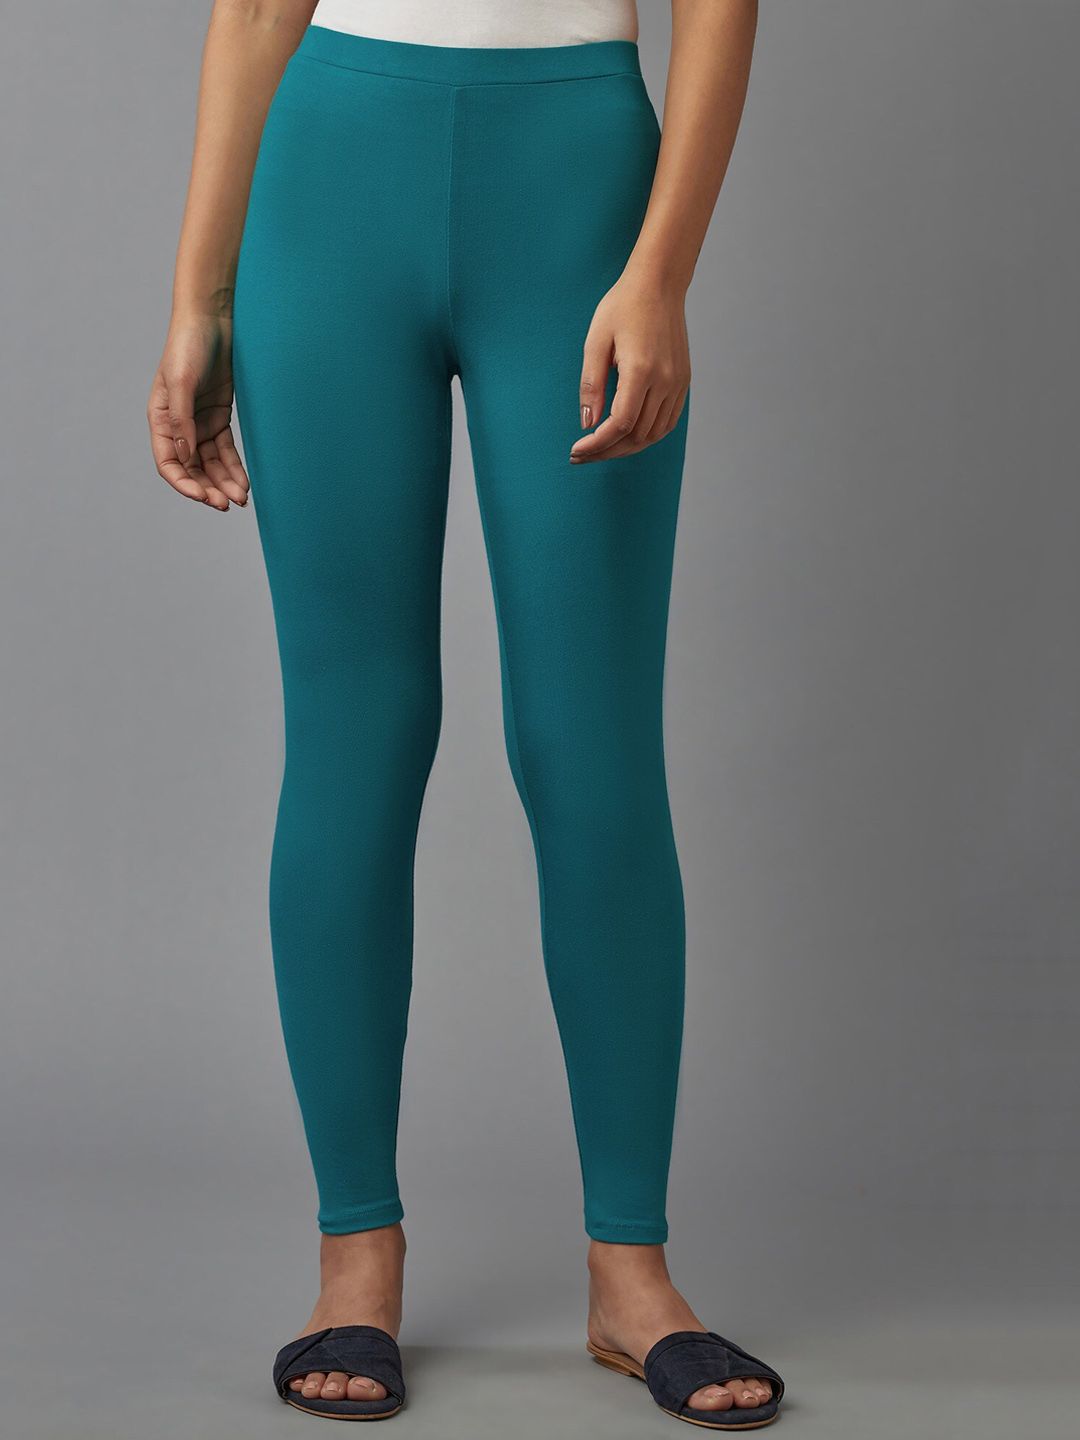 W Women Teal Green Solid Ankle Length Leggings Price in India